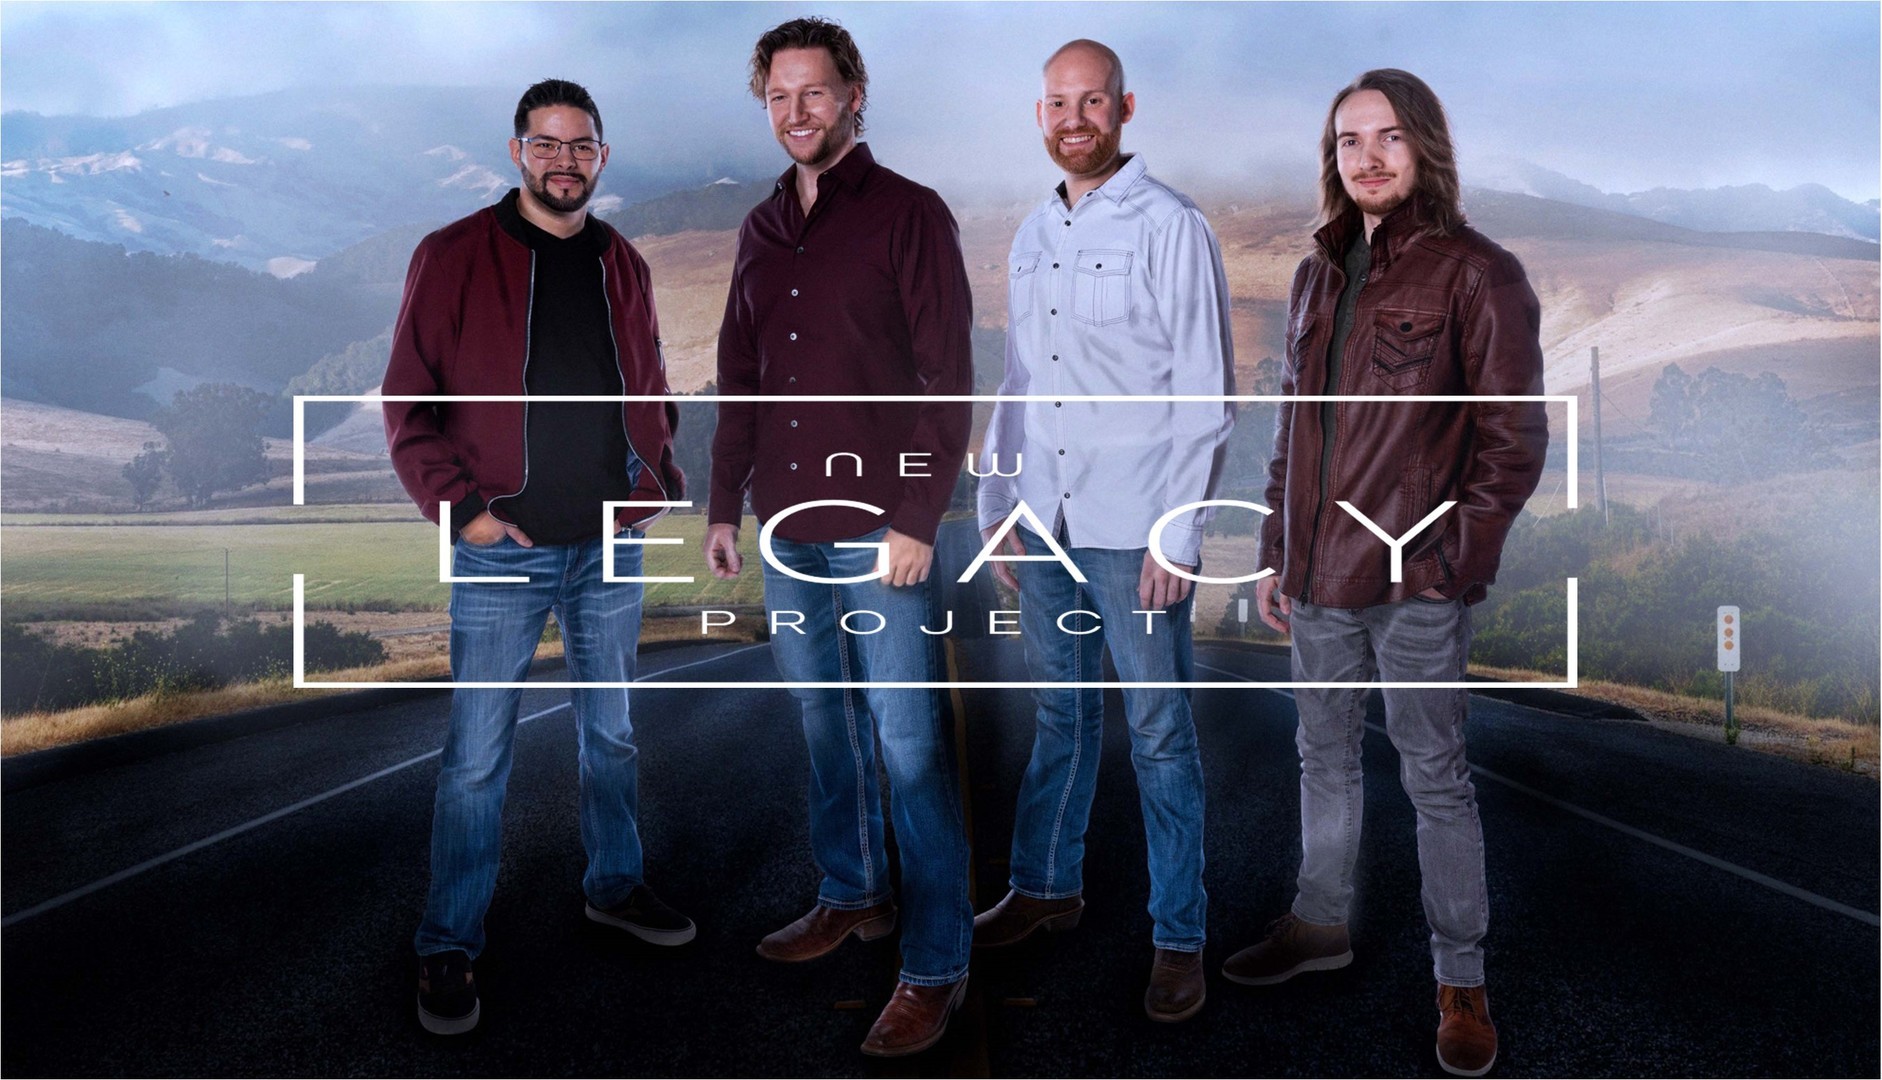 Popular Vocal Band, New Legacy Project, in Live Concert in Julesburg, Julesburg, Colorado, United States